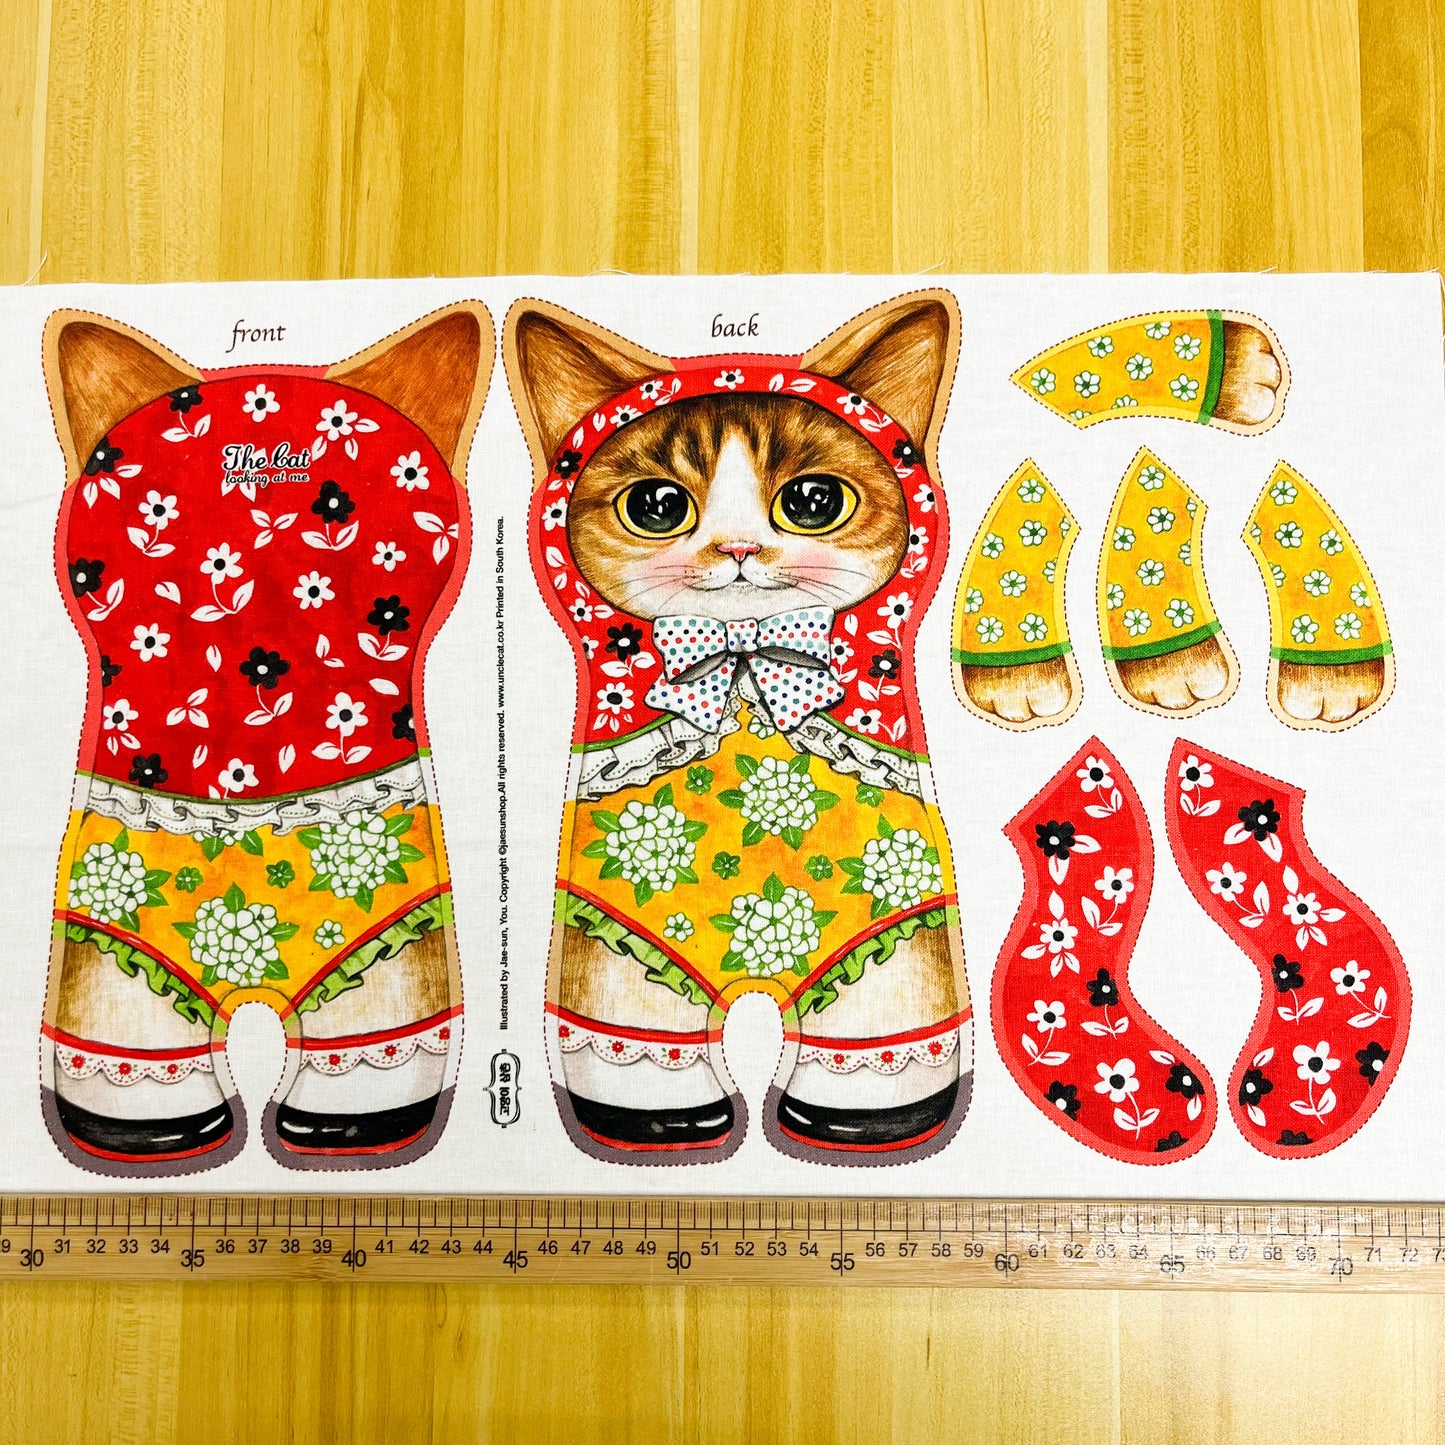 Unclecat 貓叔叔 | diy fabric for making cat doll "E.T" | cotton linen 棉麻